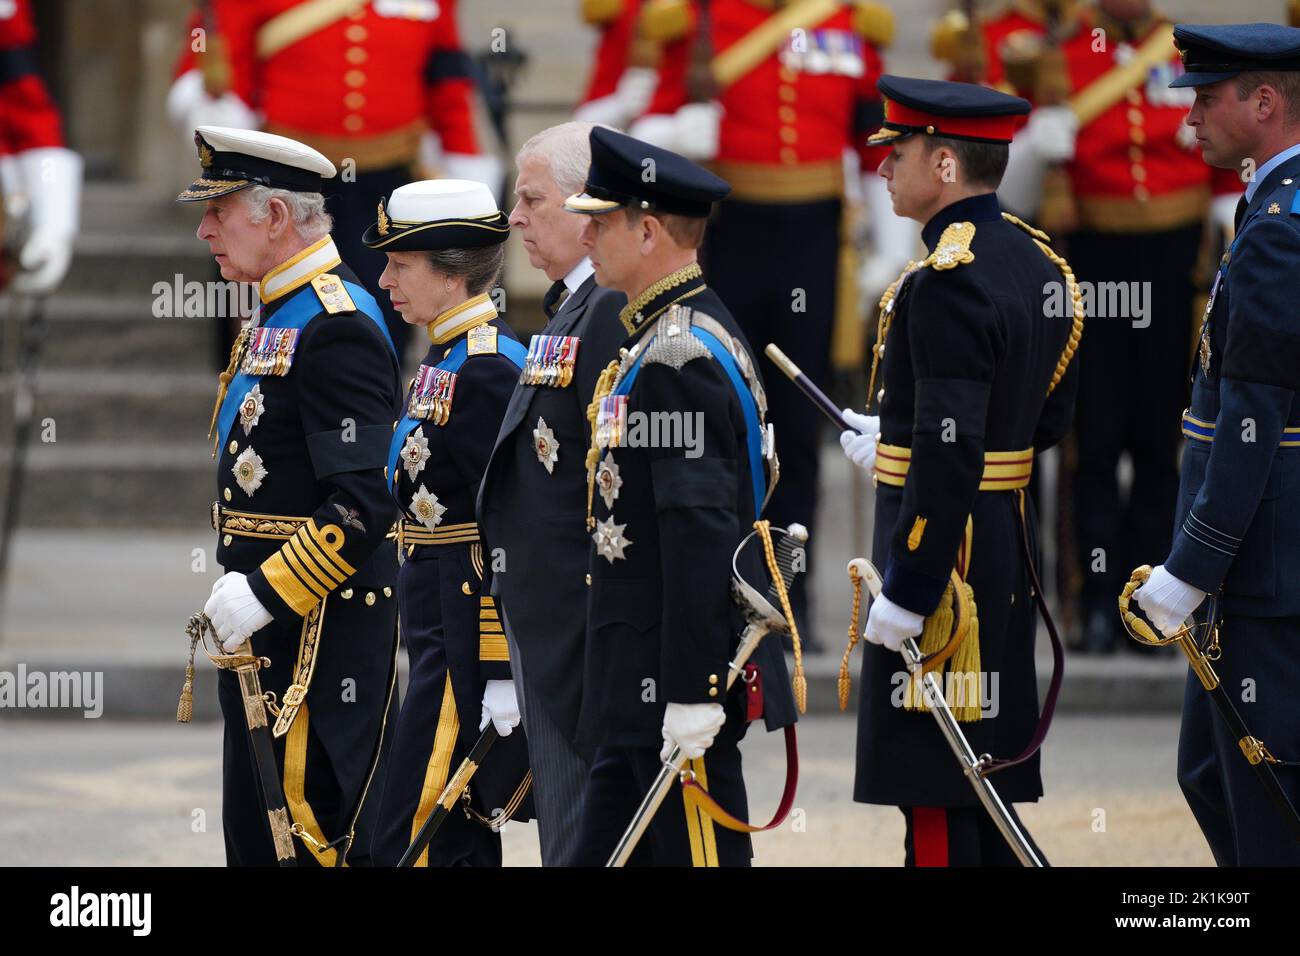 (left to right) King Charles III, the Princess Royal the Duke of York, the Earl of Wessex and the Prince of Wales arriving at the State Funeral of Queen Elizabeth II, held at Westminster Abbey, London. Picture date: Monday September 19, 2022. Stock Photo